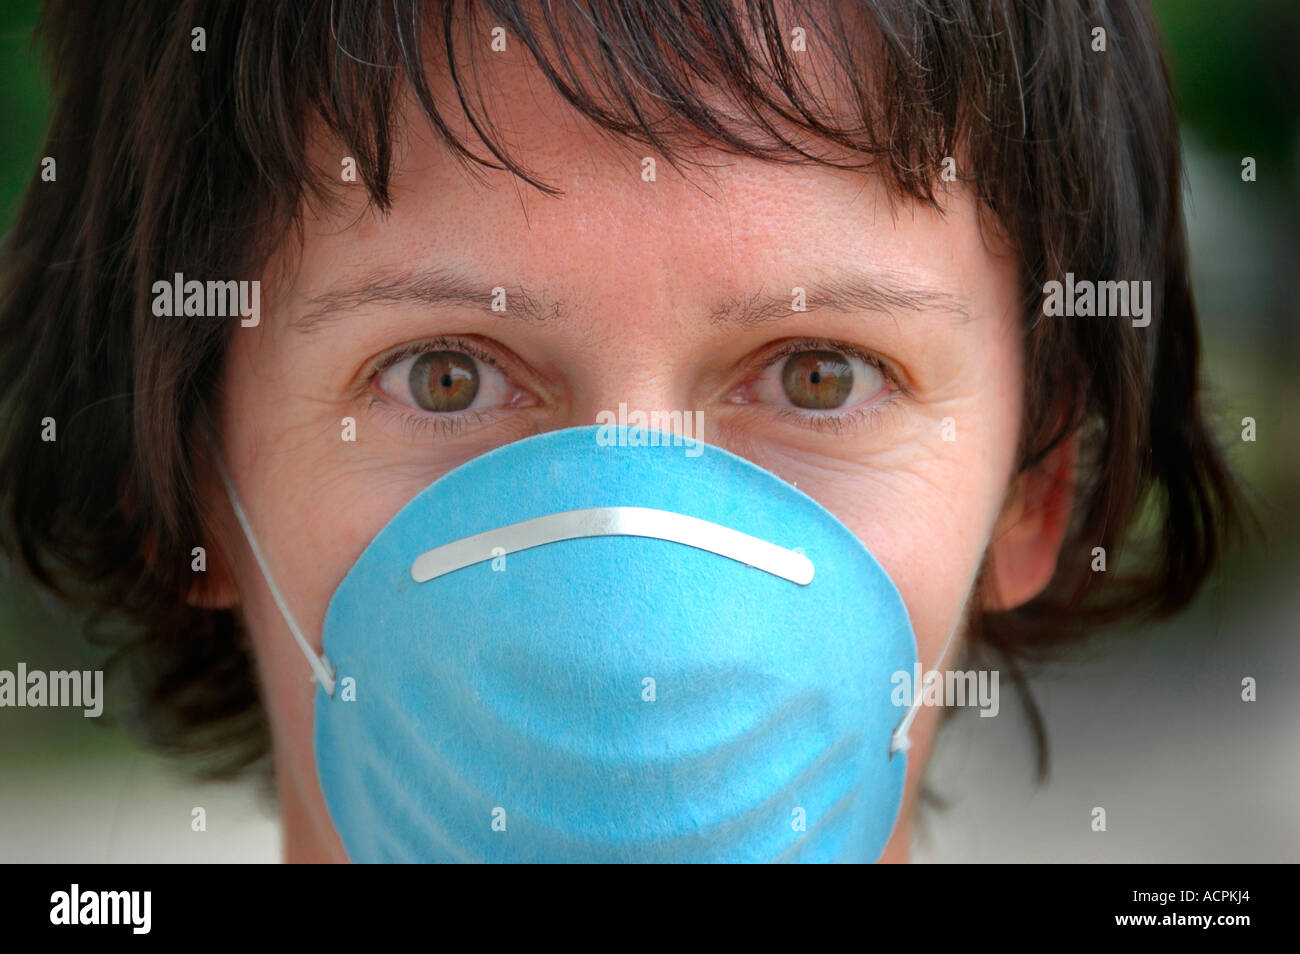 Woman wearing sanitary sterile mask for hygienic reasons over mouth and ...